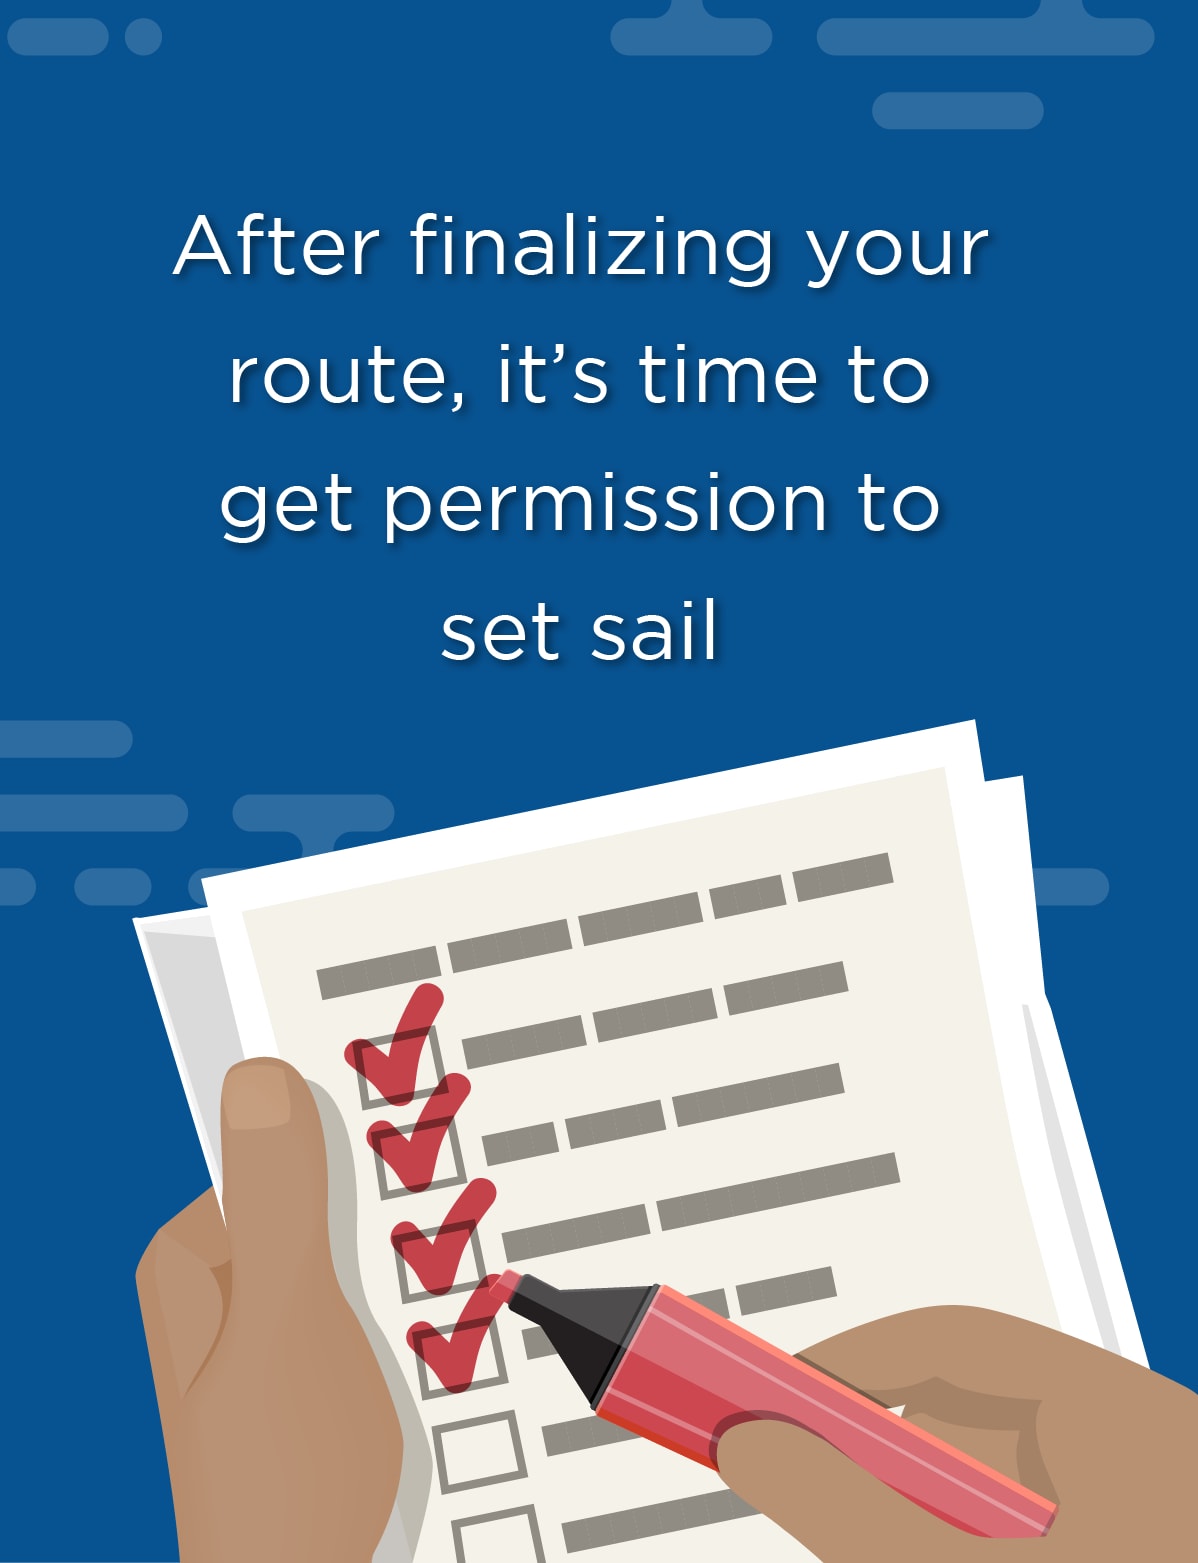 Image of a person marking on a checklist, and text reading 'After finalizing your route, it's time to get permission to set sail'